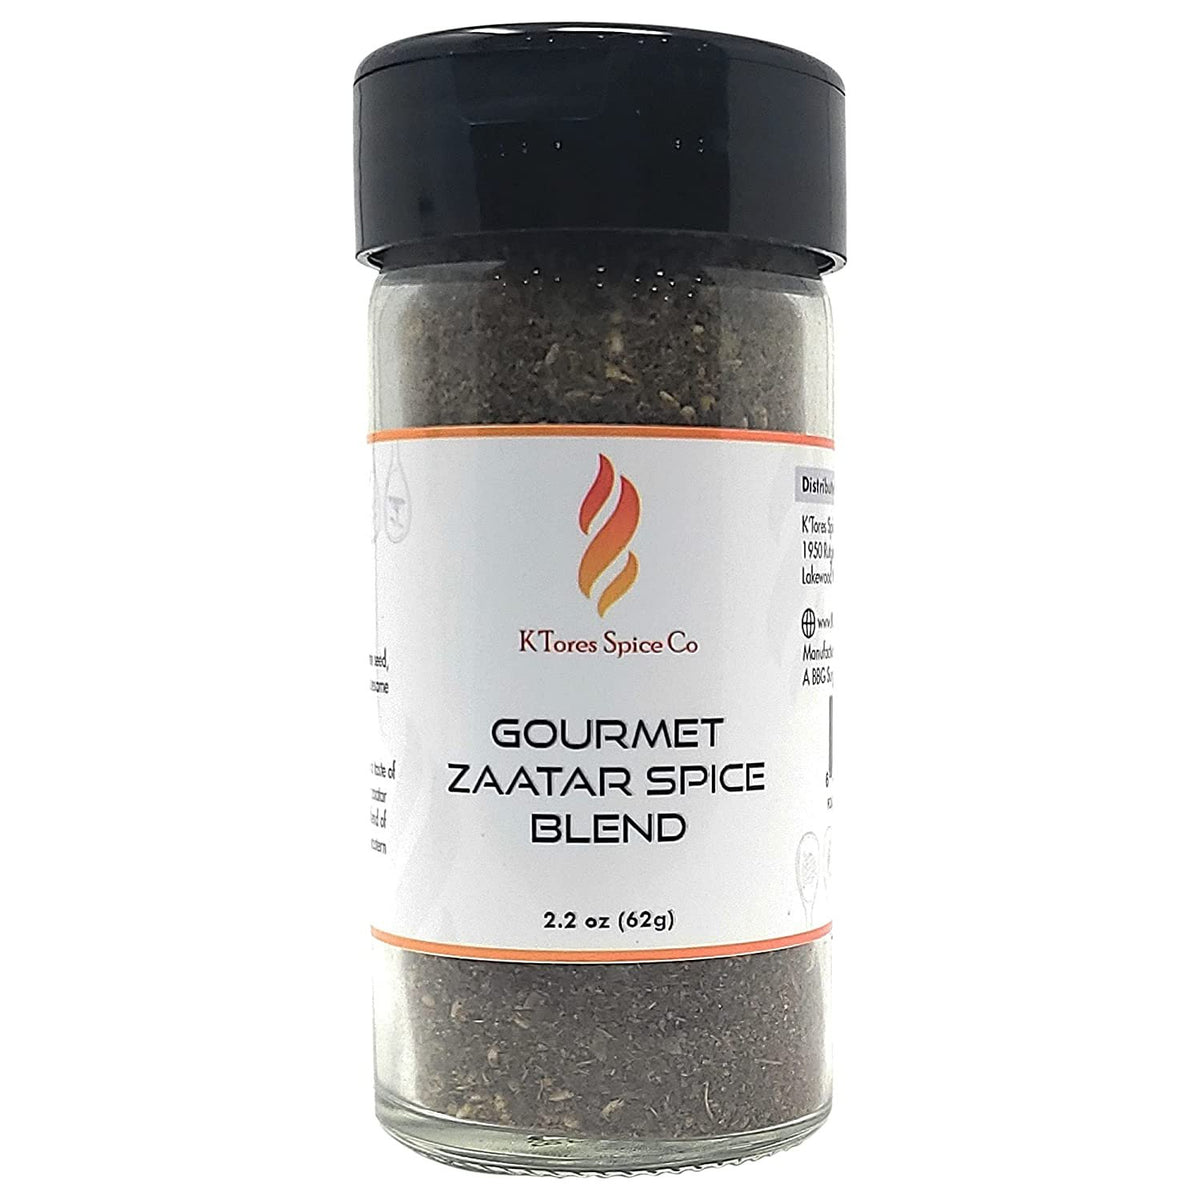 K'TORES SPICE CO Gourmet Zaatar Spice Blend - 4OZ Kosher Zatar Hyssop Seasoning Mix - For Chicken, Meat, Beef, and More - Middle Eastern Spices